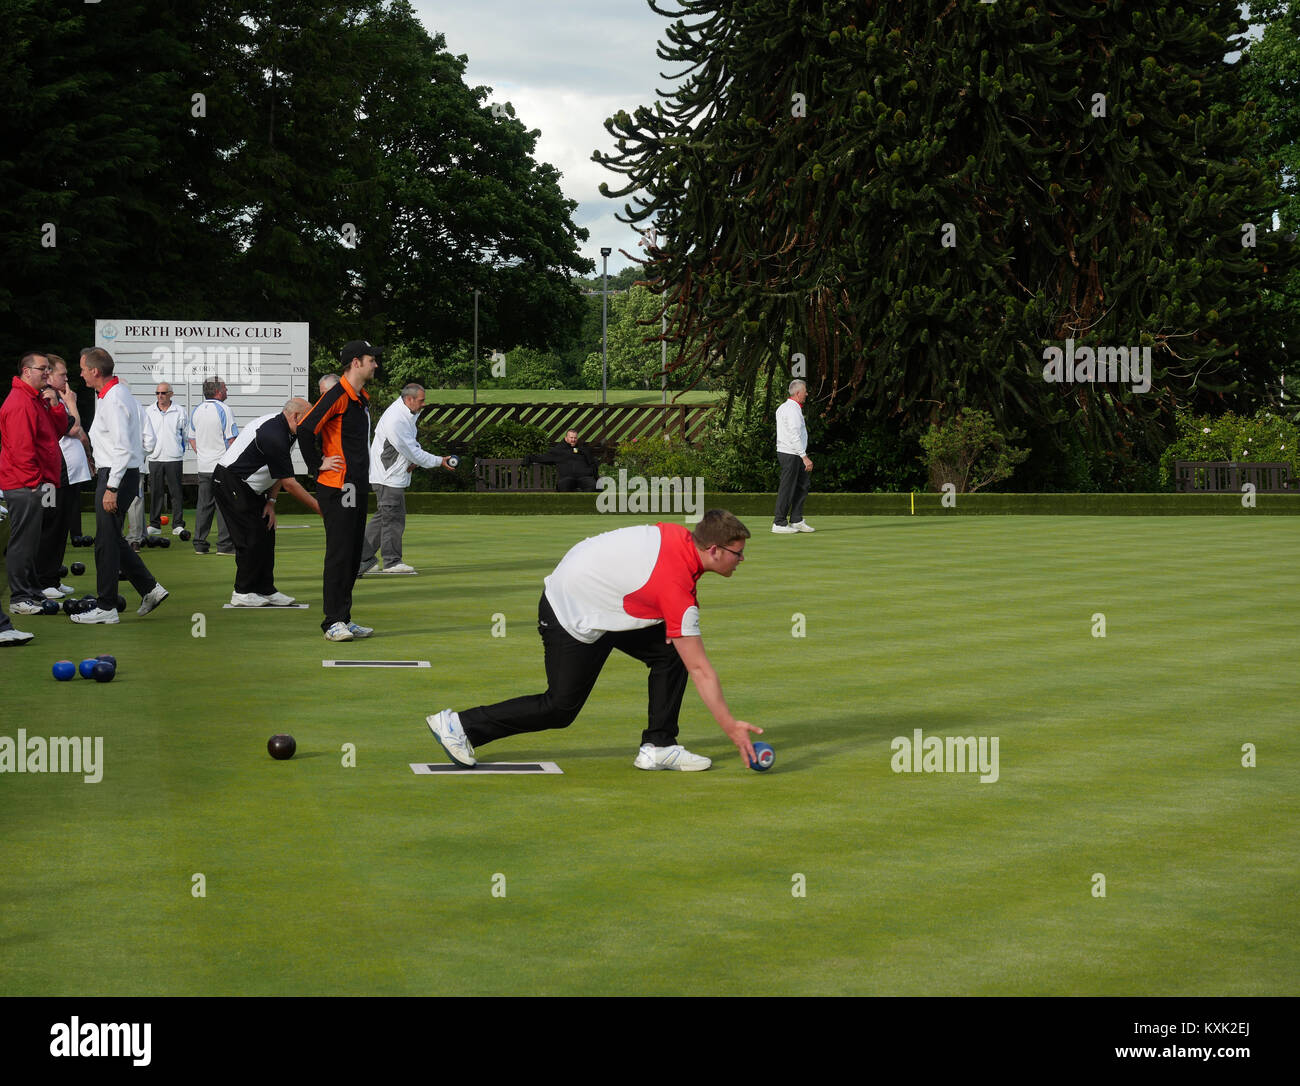 Bowlers taking part in a club competition at Perth Bowling Club, Perth, Scotland, UK Stock Photo